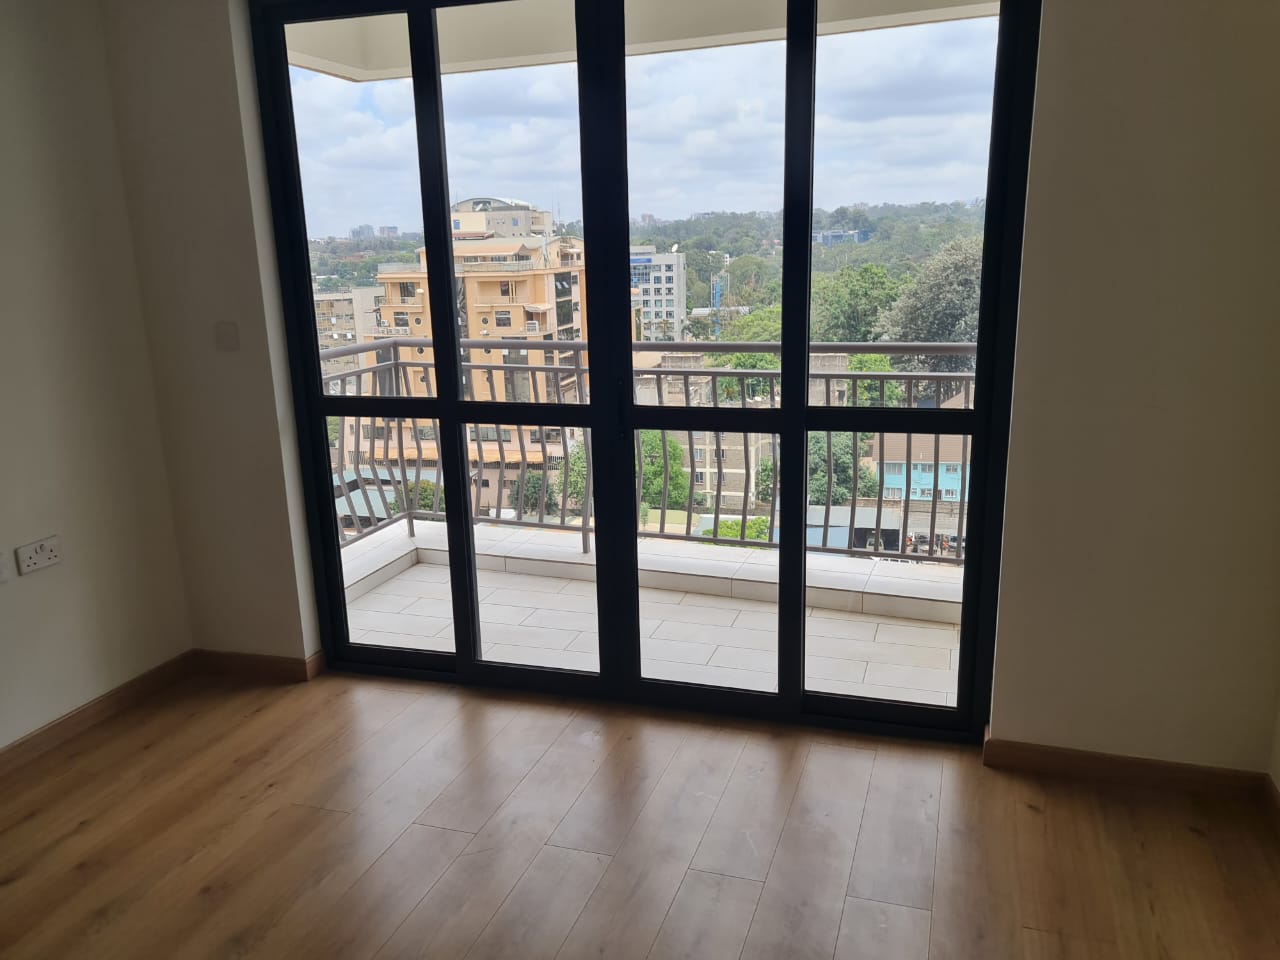 4 Bedroom New Penthouse for Rent in the heart of Westlands with great views, lift, borehole, power backup generator For Rent at Ksh160k (19)